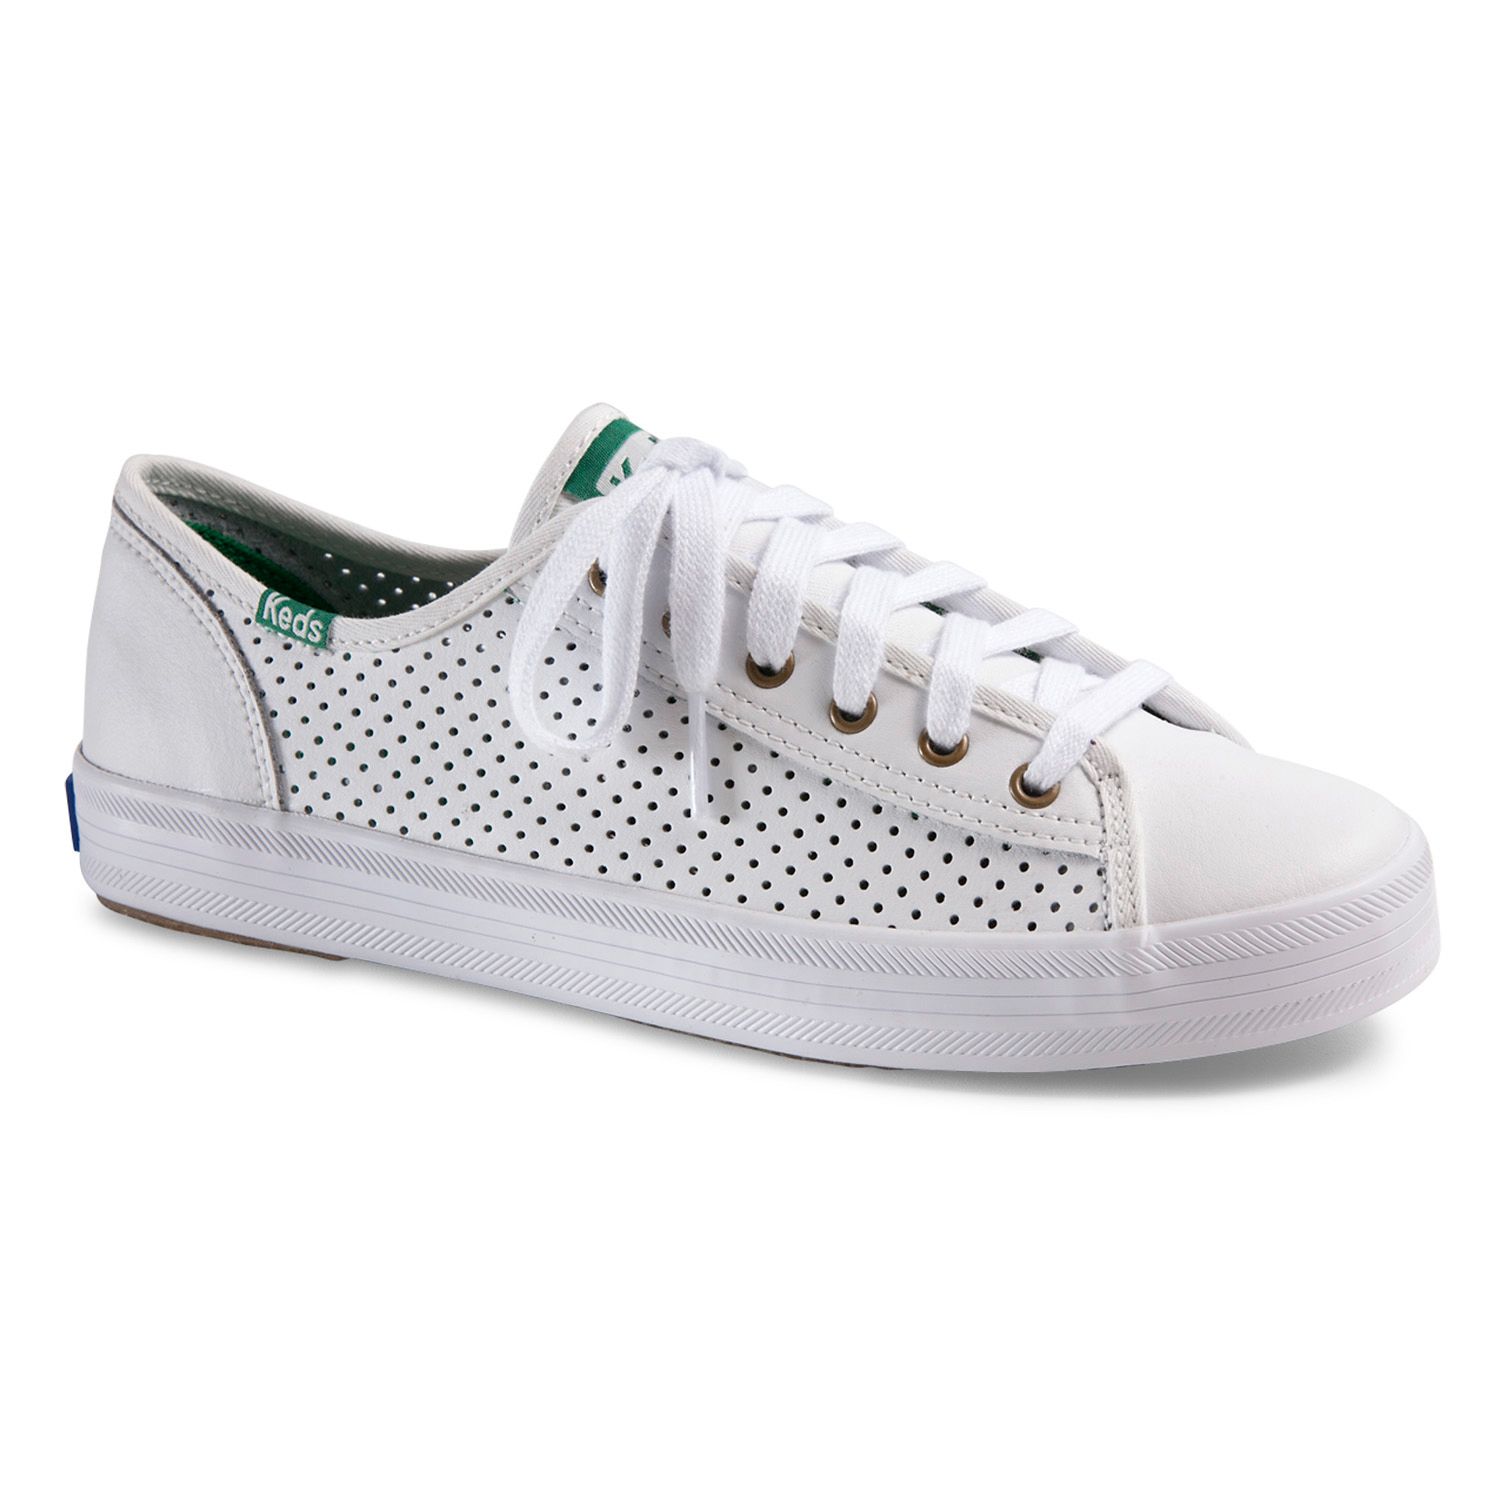 keds women's kickstart perforated leather sneakers